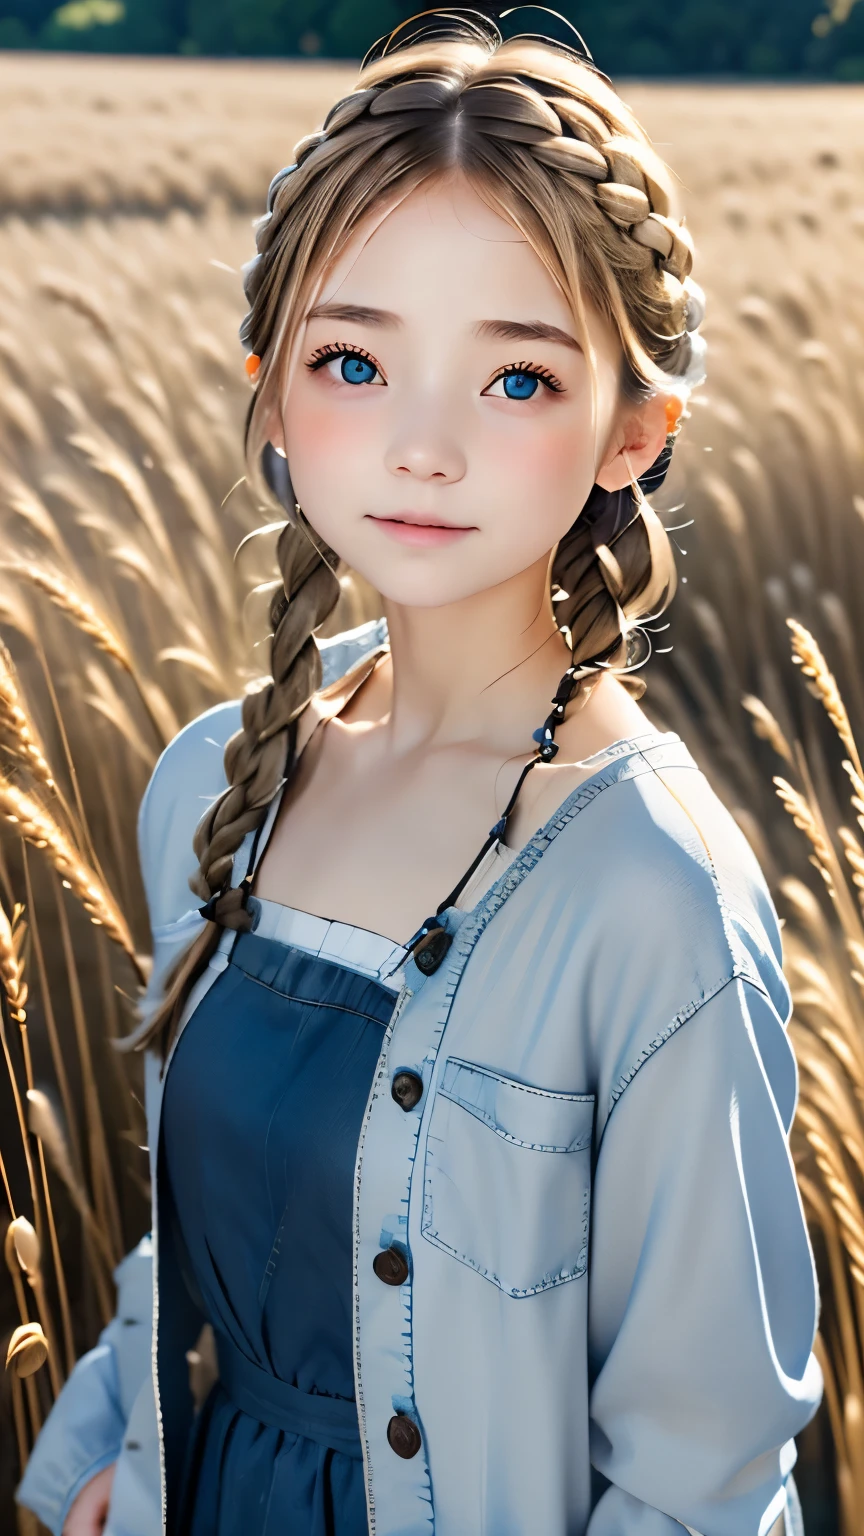 one woman、cute face、Also々new expression、Japanese、charming eyes、cream hair、french braid、18-year-old、gray eyes、camisole dress、blue jacket、outdoor、Alsoとした佇まい、wheat field